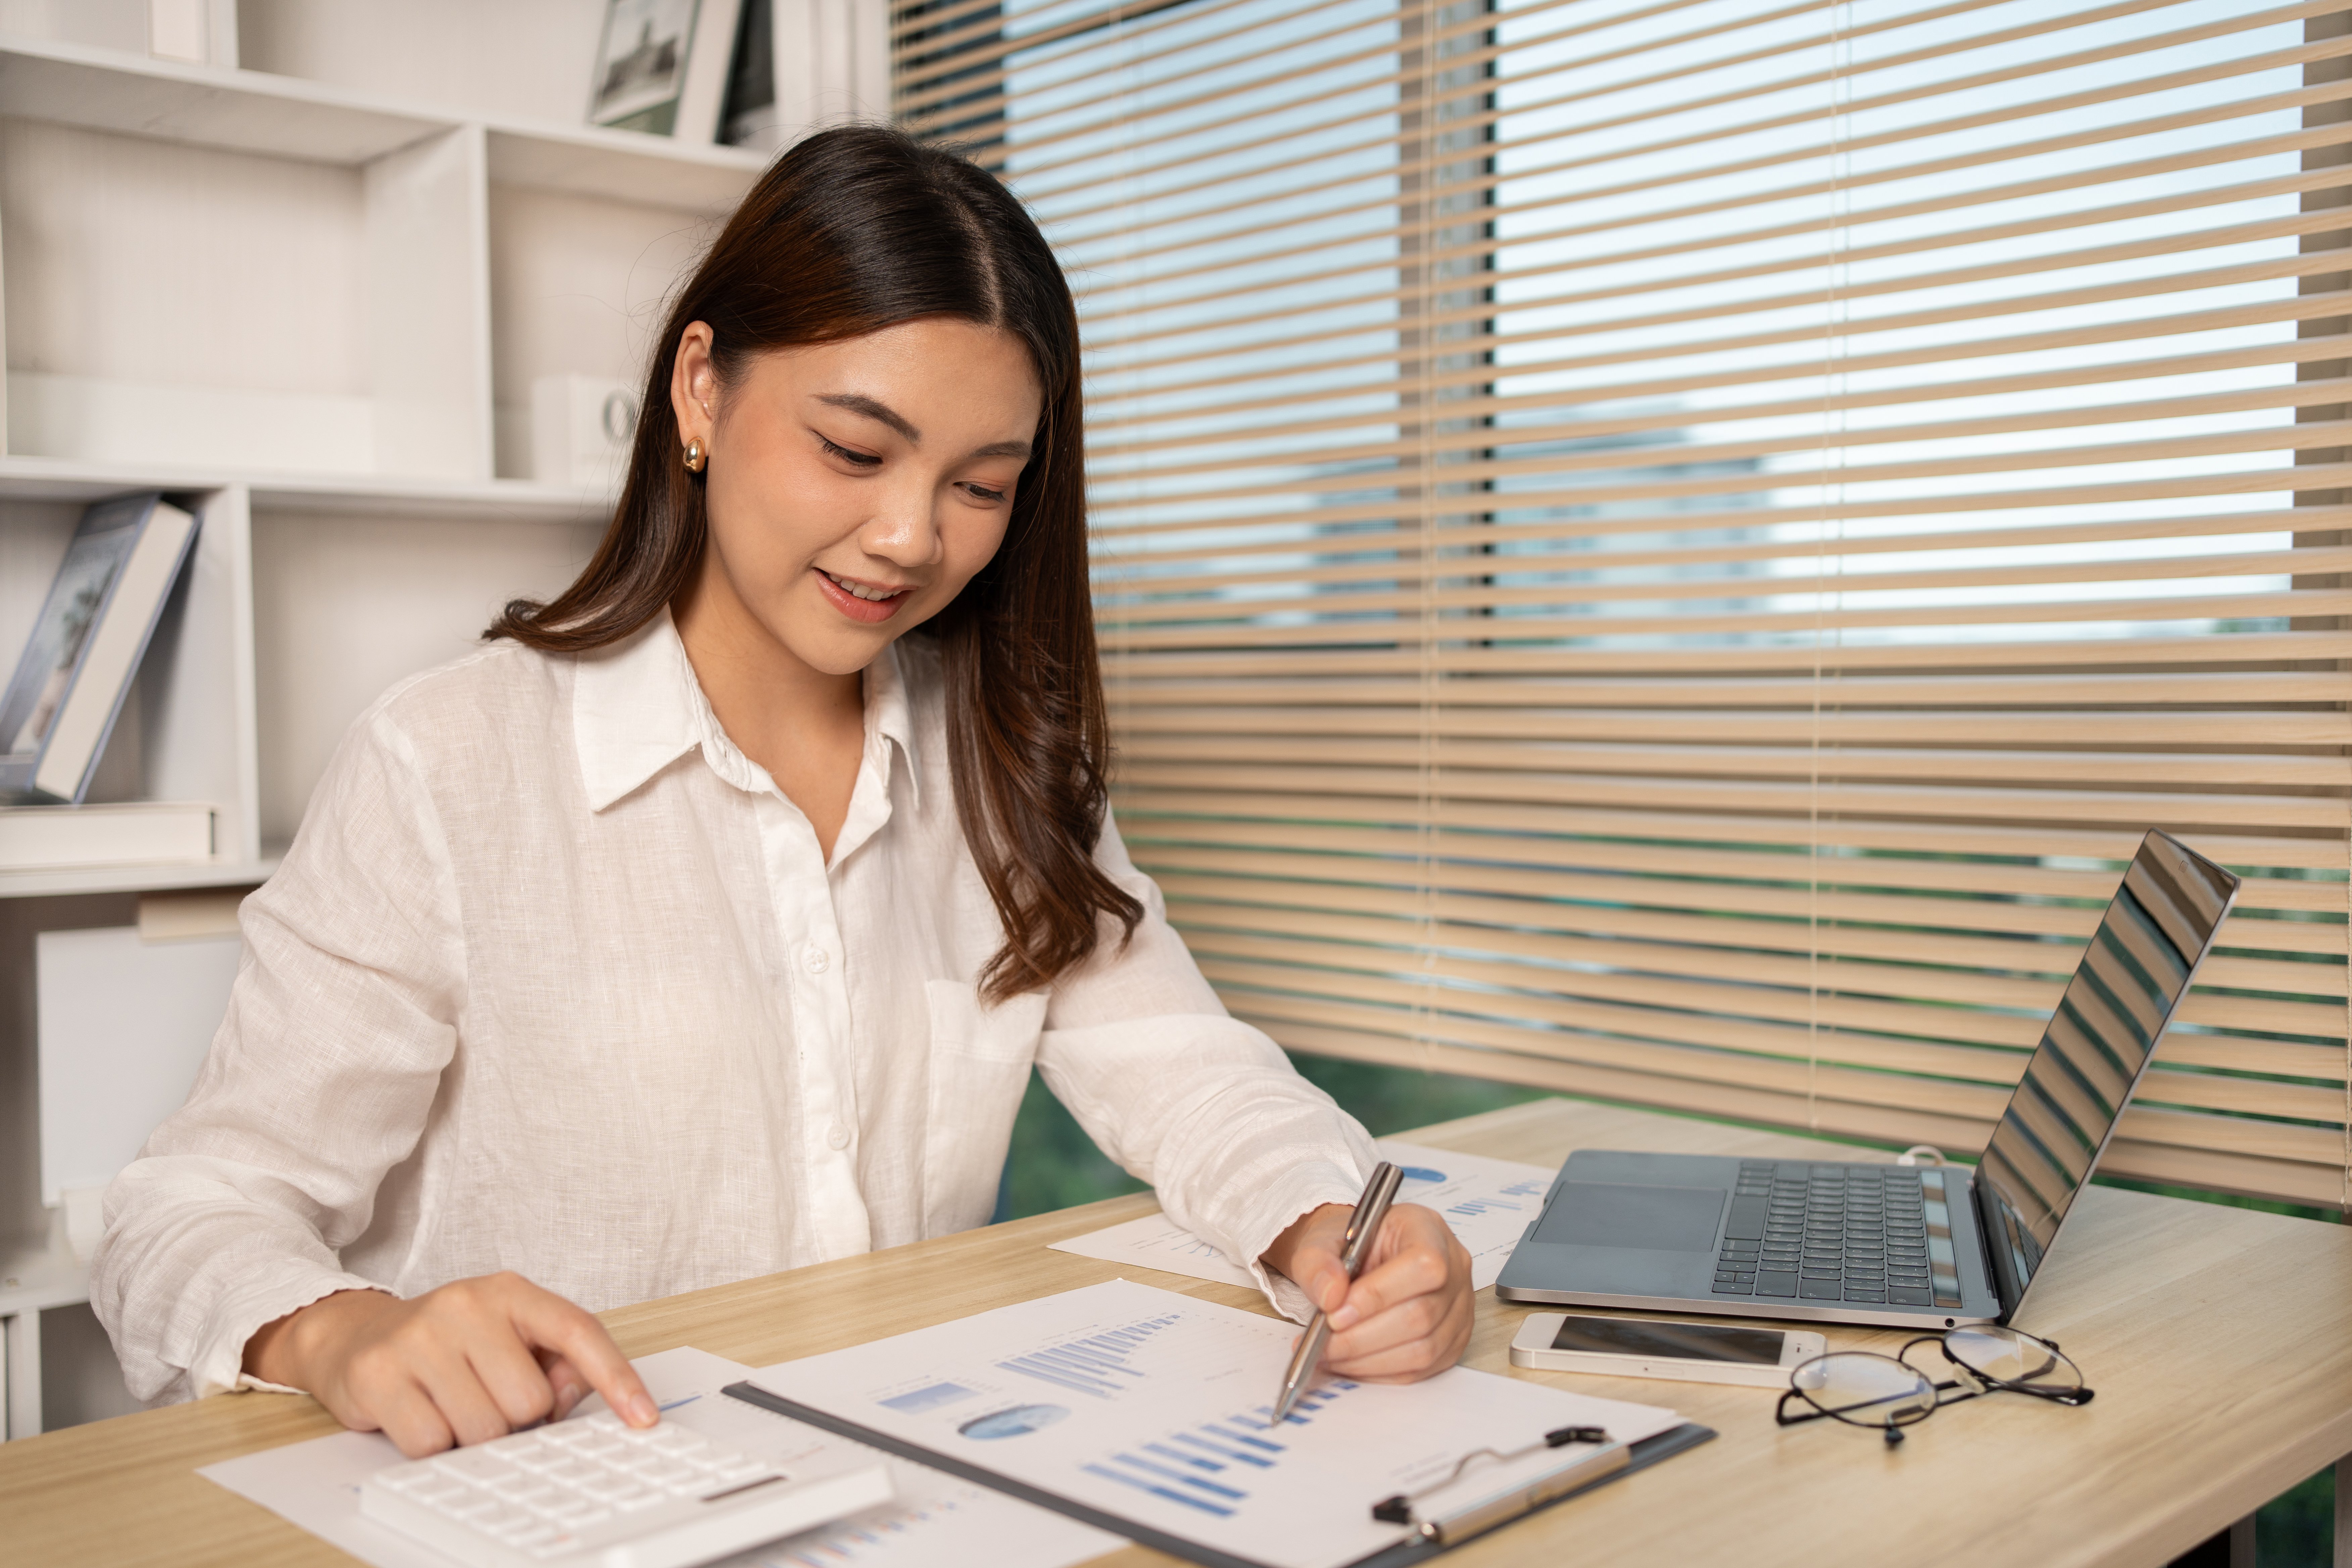 A woman performing outsourced bookkeeping responsibilities